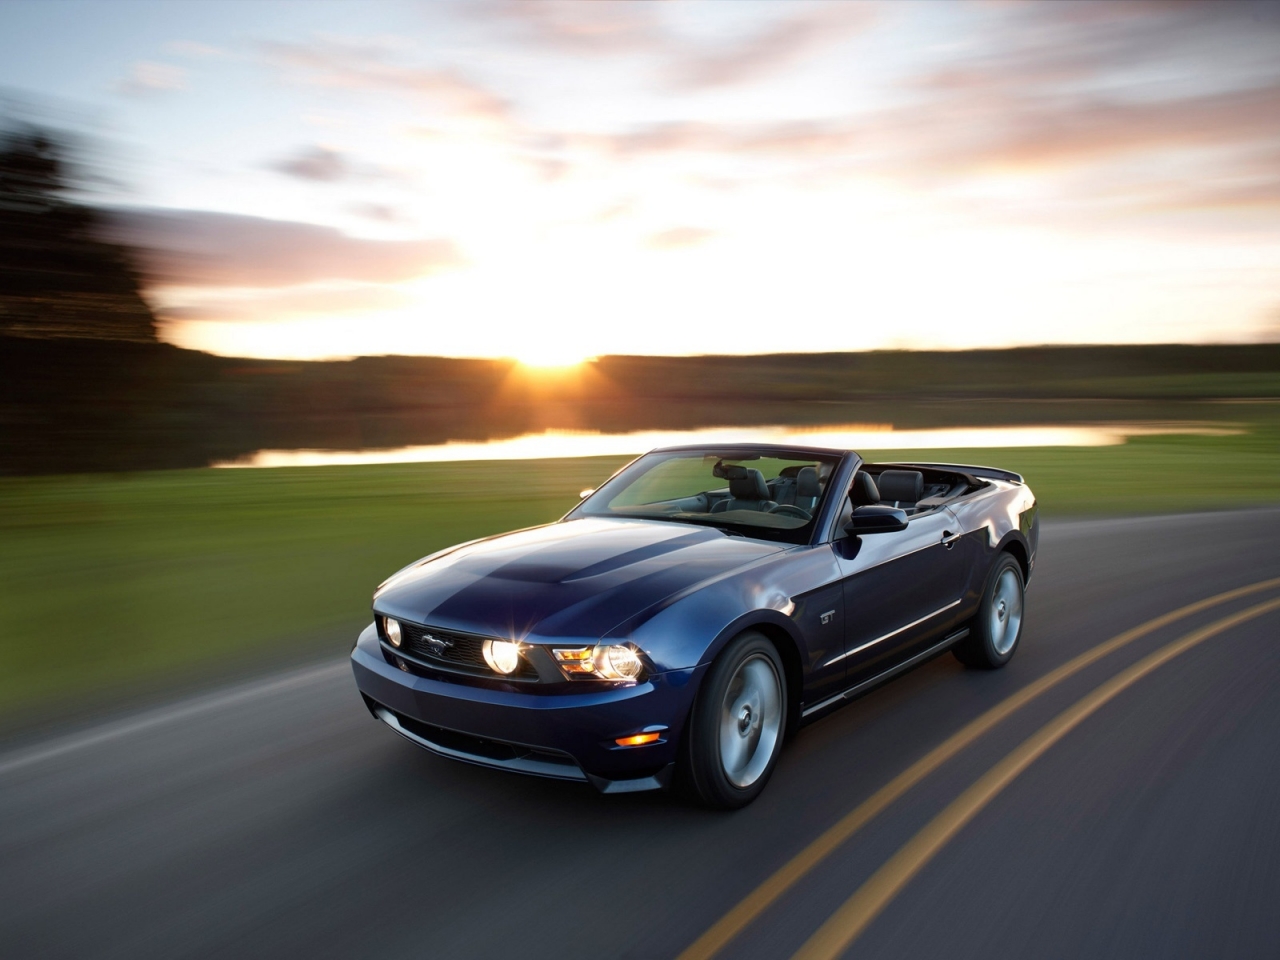 Ford Mustang Convertible 2010 for 1280 x 960 resolution